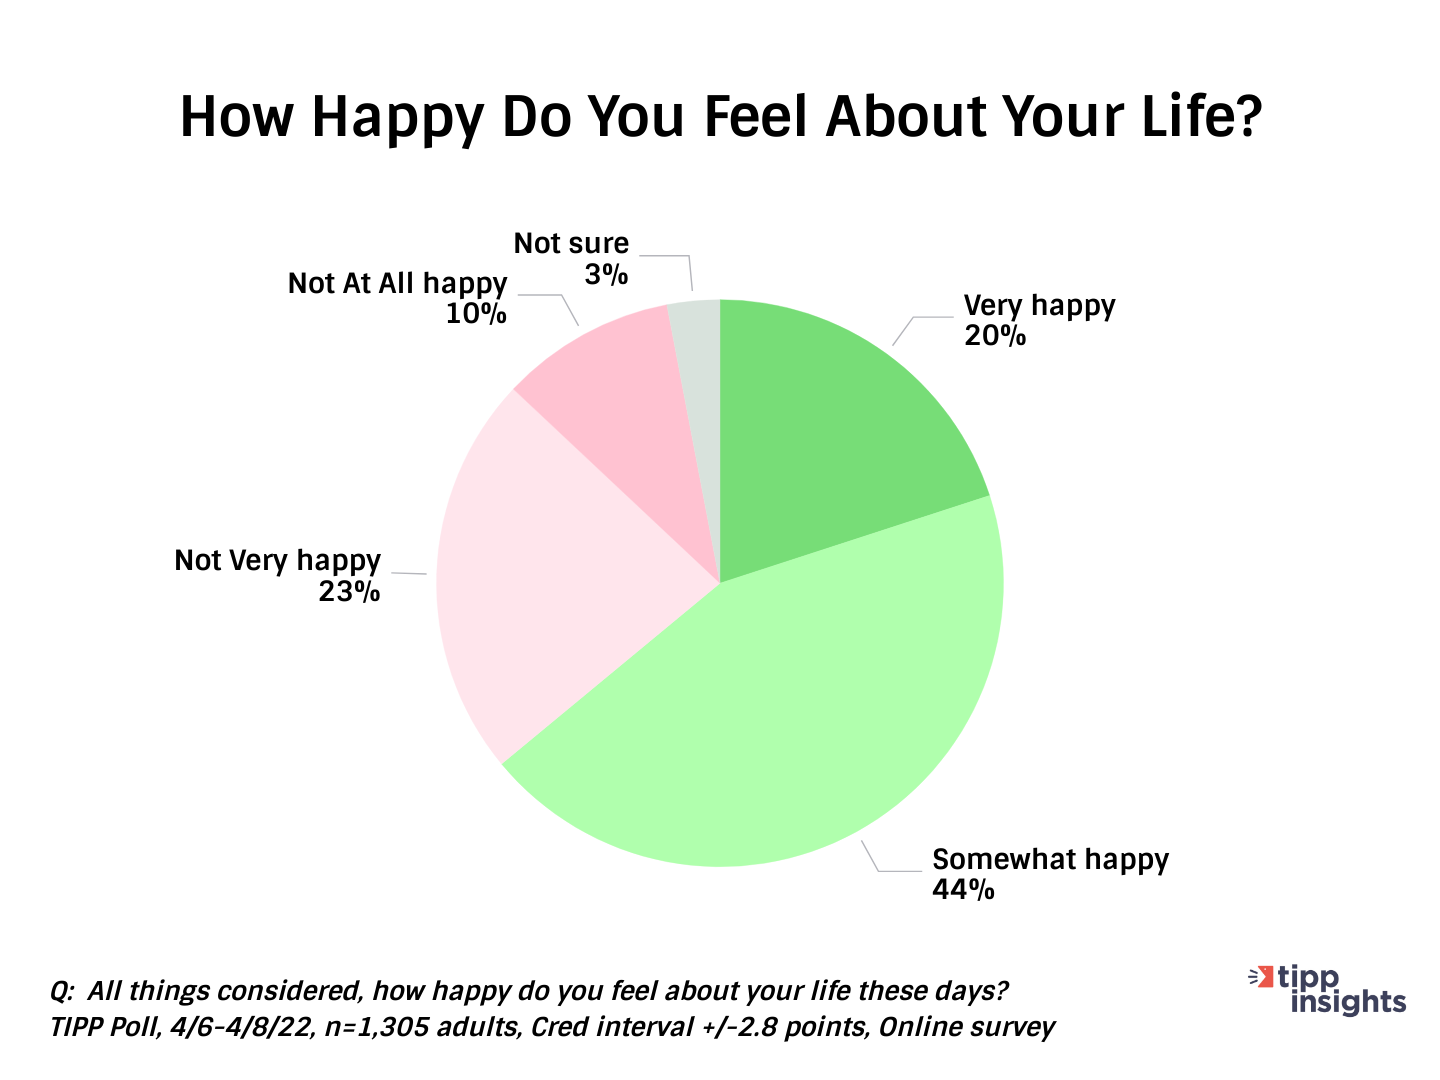 How happy do you feel about your life?